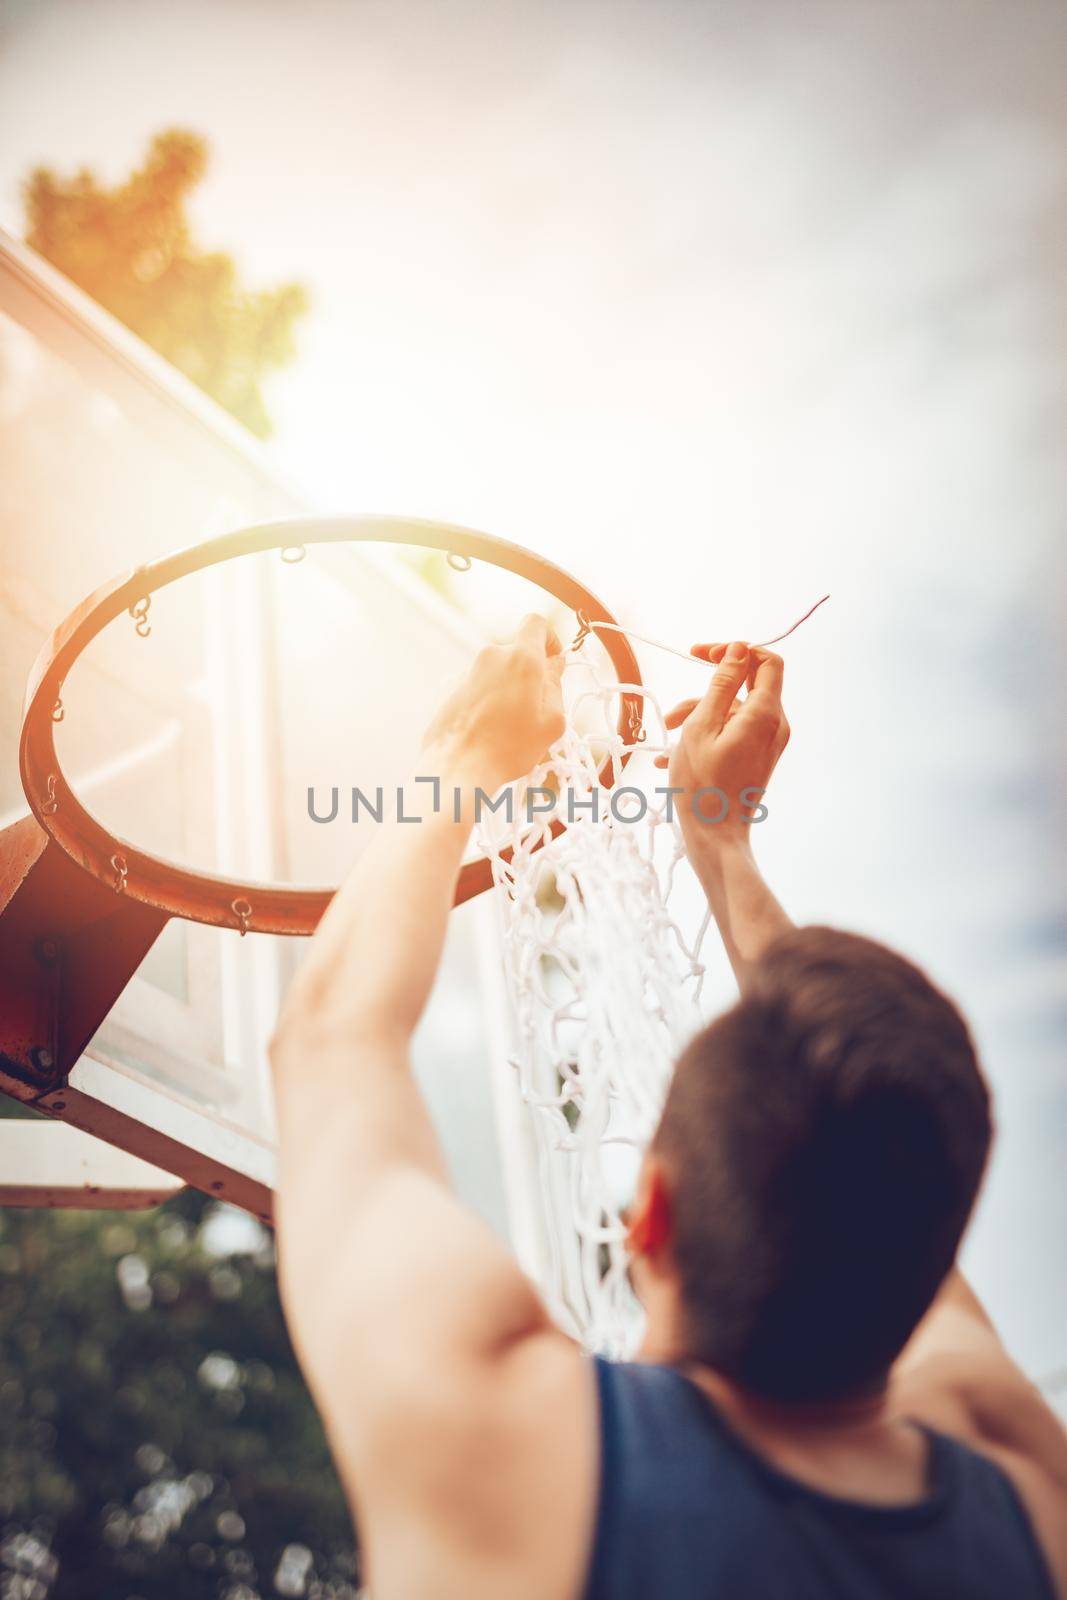 Installation Of Basketball Net On The Hoop by MilanMarkovic78